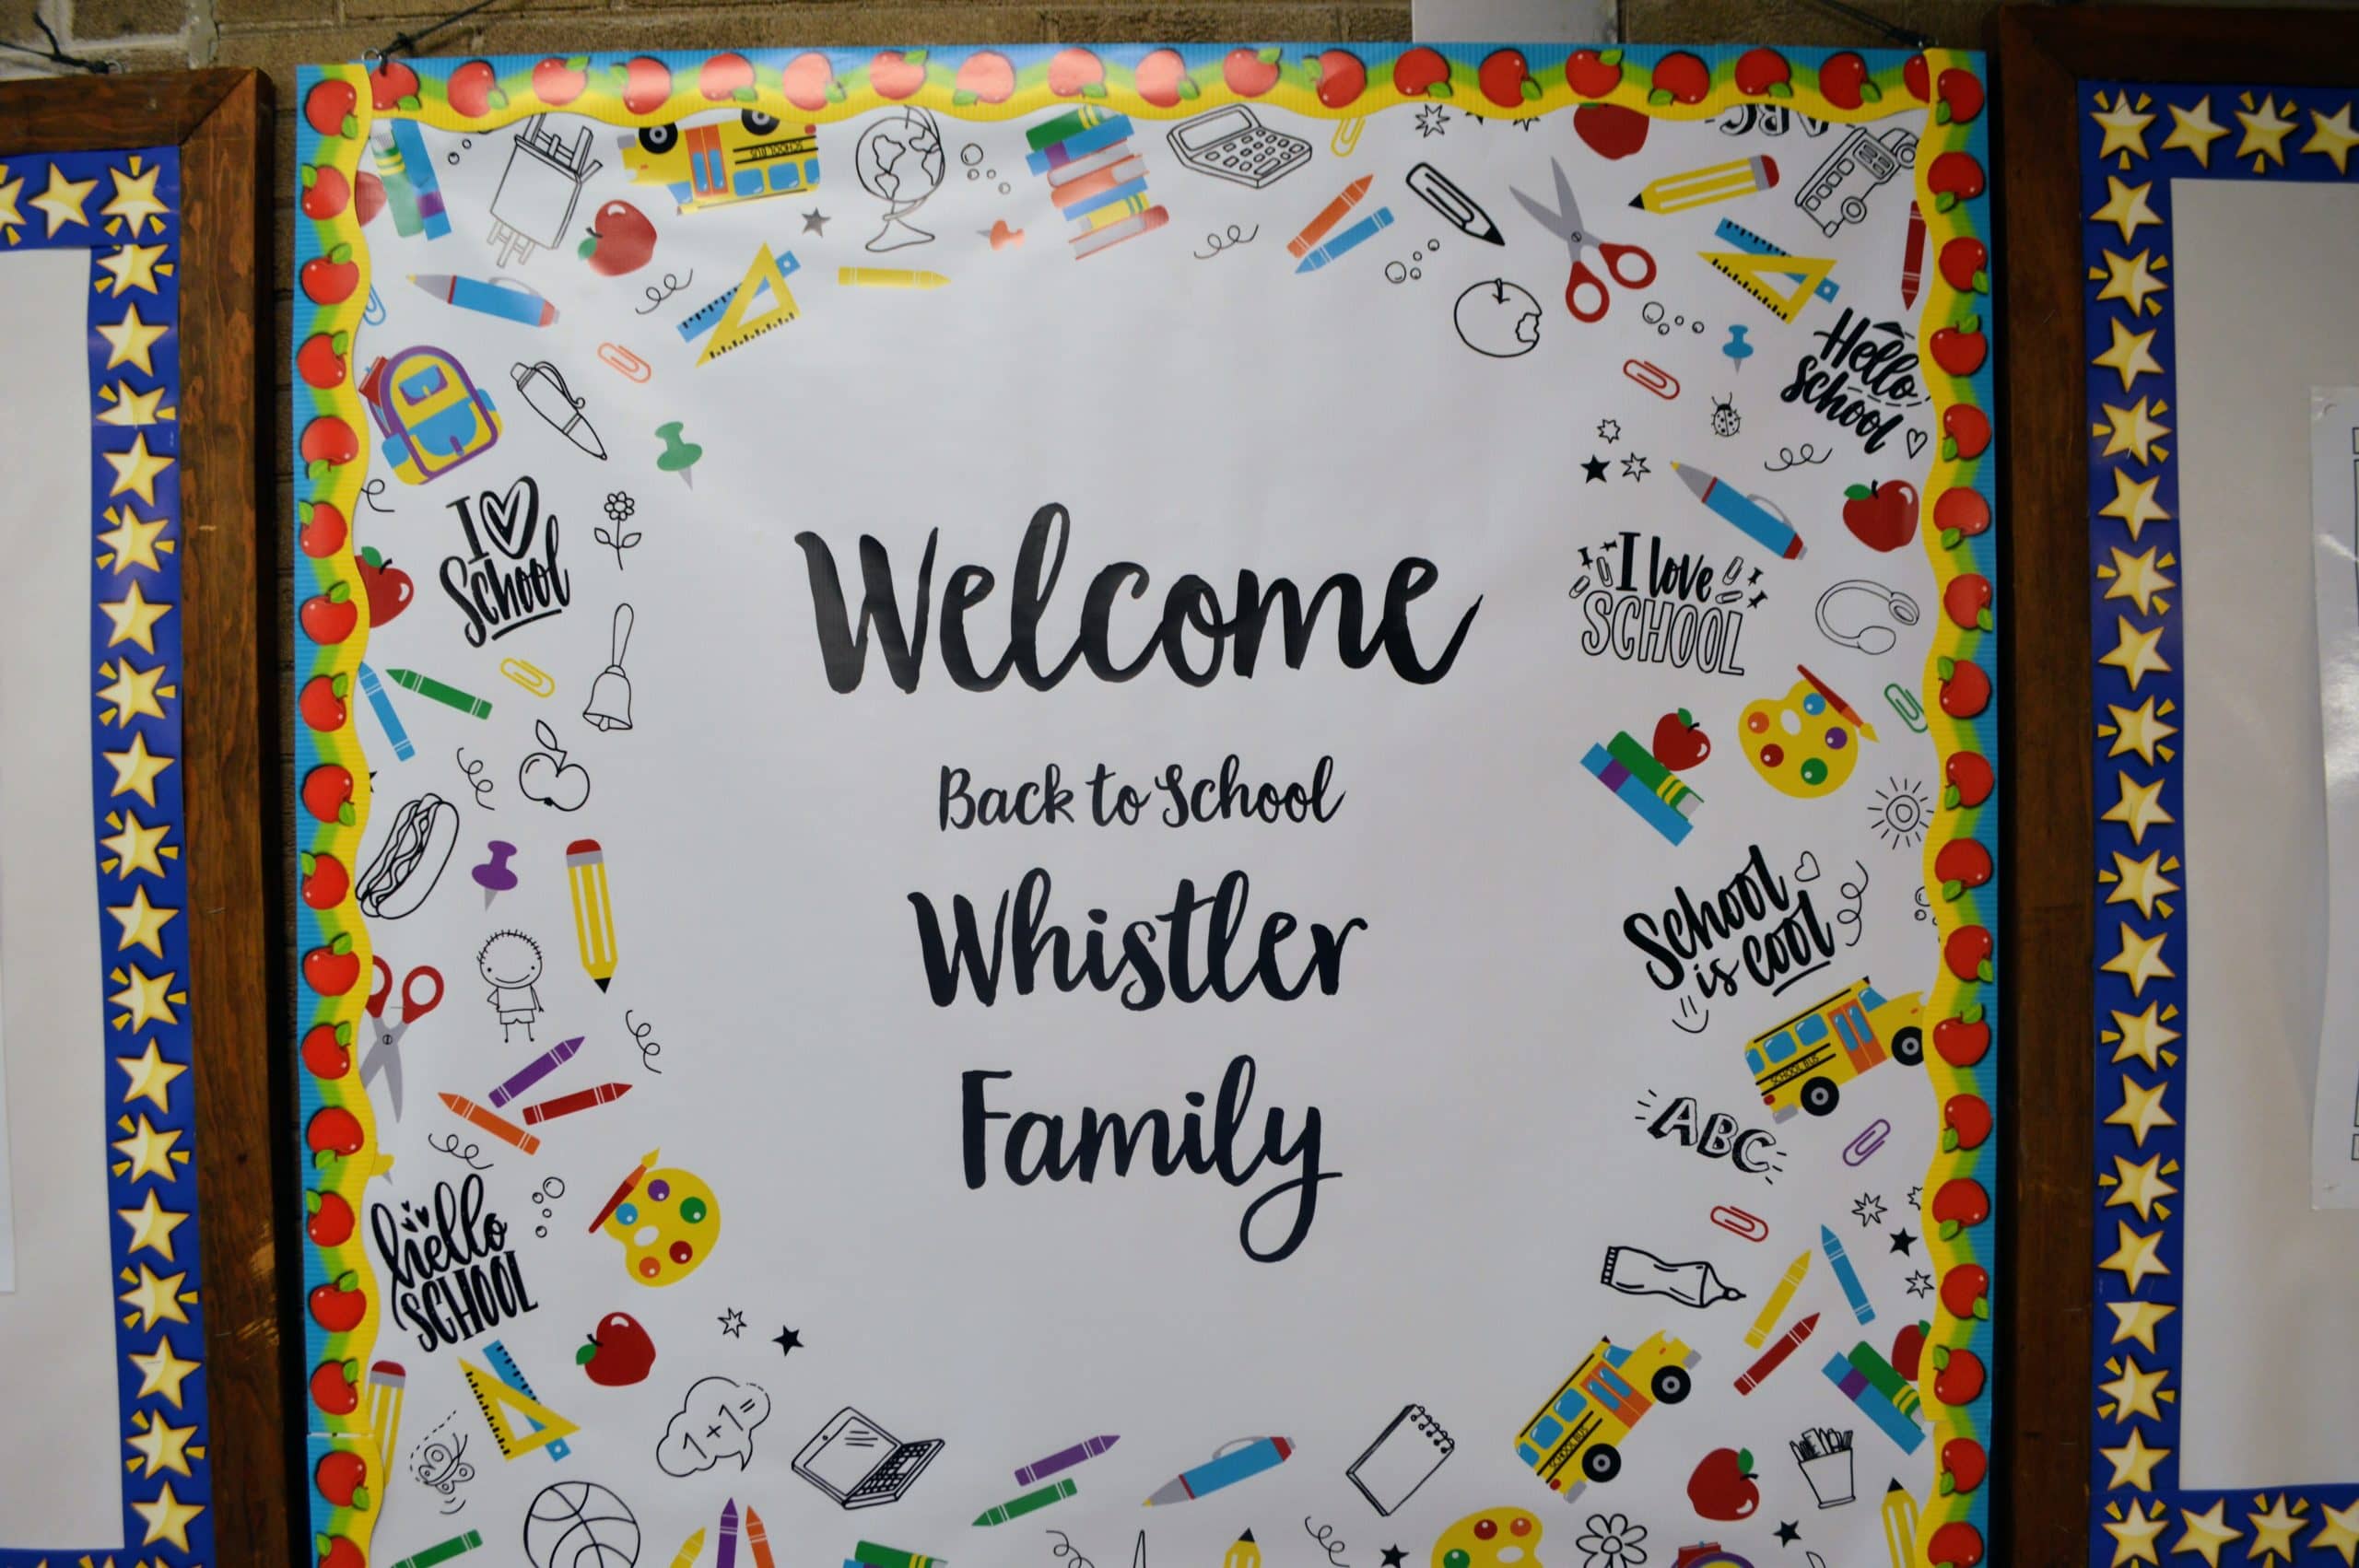 Welcome back to school Whistler Family message on the bulletin